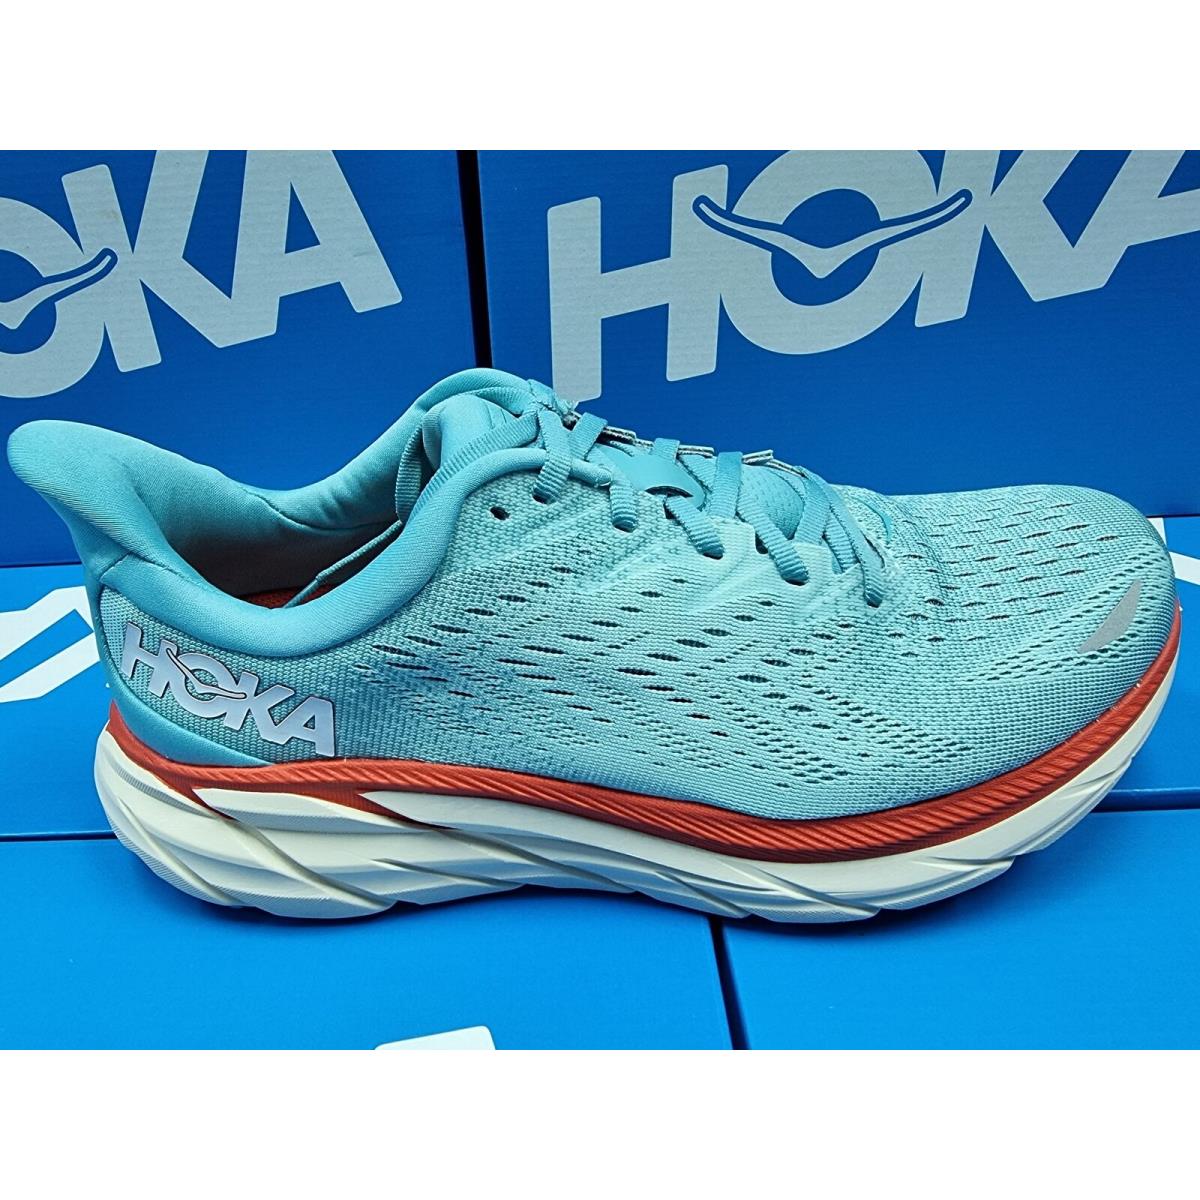 Hoka One One Clifton 8 1121375/AEBL Women Wide D Running Shoes